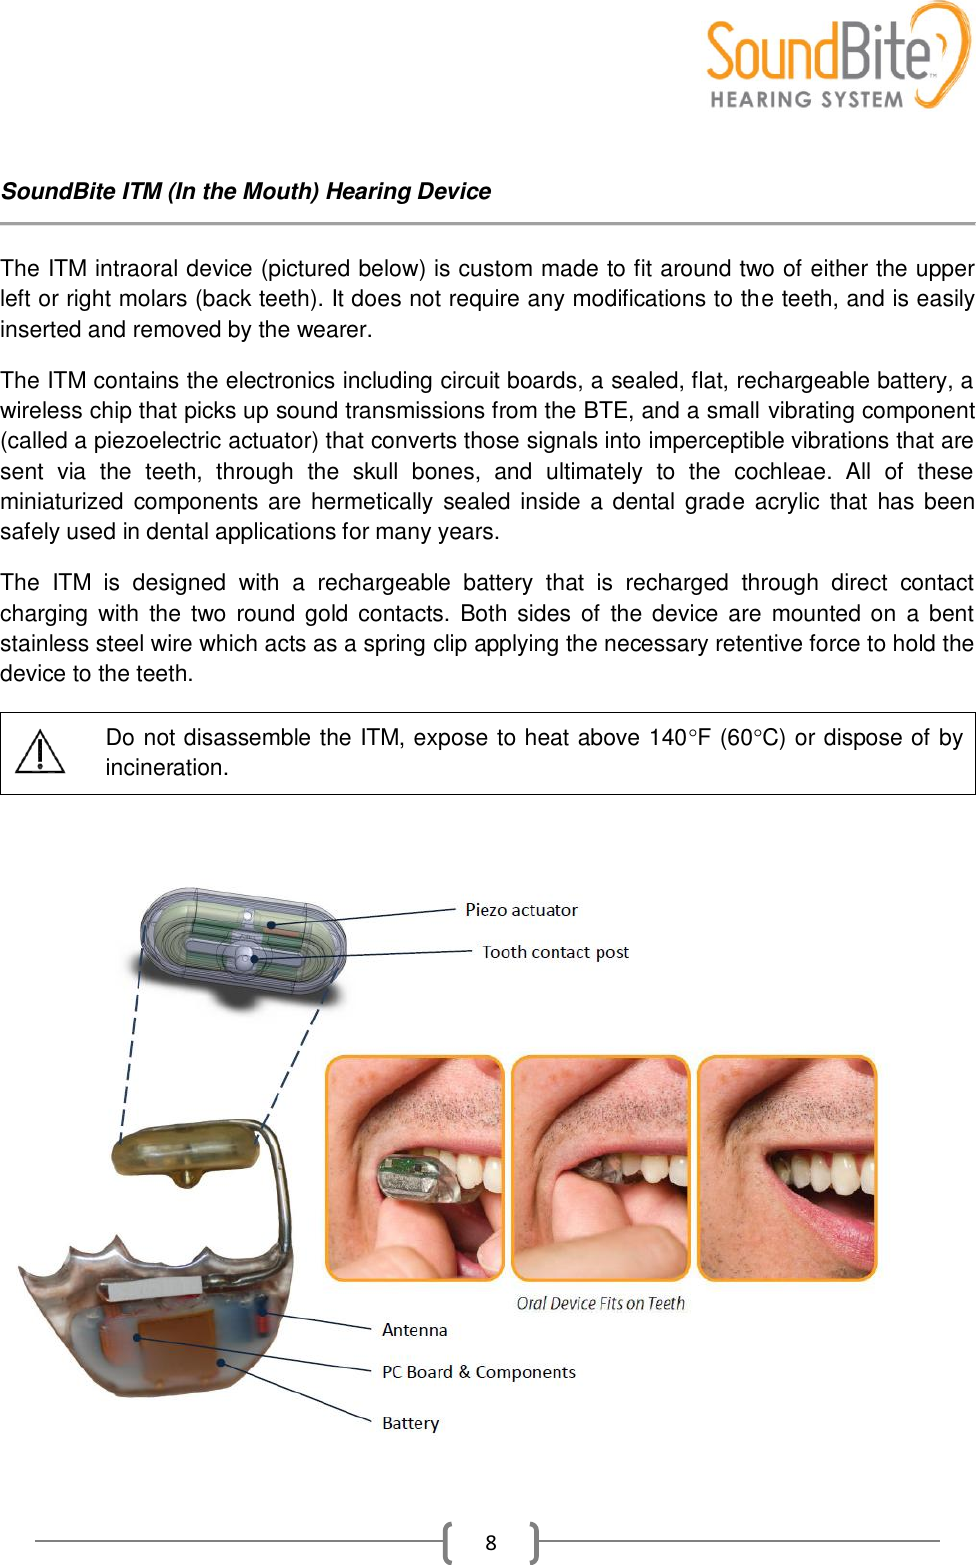    8  SoundBite ITM (In the Mouth) Hearing Device  The ITM intraoral device (pictured below) is custom made to fit around two of either the upper left or right molars (back teeth). It does not require any modifications to the teeth, and is easily inserted and removed by the wearer.  The ITM contains the electronics including circuit boards, a sealed, flat, rechargeable battery, a wireless chip that picks up sound transmissions from the BTE, and a small vibrating component (called a piezoelectric actuator) that converts those signals into imperceptible vibrations that are sent  via  the  teeth,  through  the  skull  bones,  and  ultimately  to  the  cochleae.  All  of  these miniaturized components are hermetically sealed  inside  a dental grade acrylic that  has been safely used in dental applications for many years.  The  ITM  is  designed  with  a  rechargeable  battery  that  is  recharged  through  direct  contact charging  with  the  two  round gold contacts.  Both  sides  of  the device  are  mounted on  a bent stainless steel wire which acts as a spring clip applying the necessary retentive force to hold the device to the teeth.  Do not disassemble the ITM, expose to heat above 140F (60C) or dispose of by incineration.   